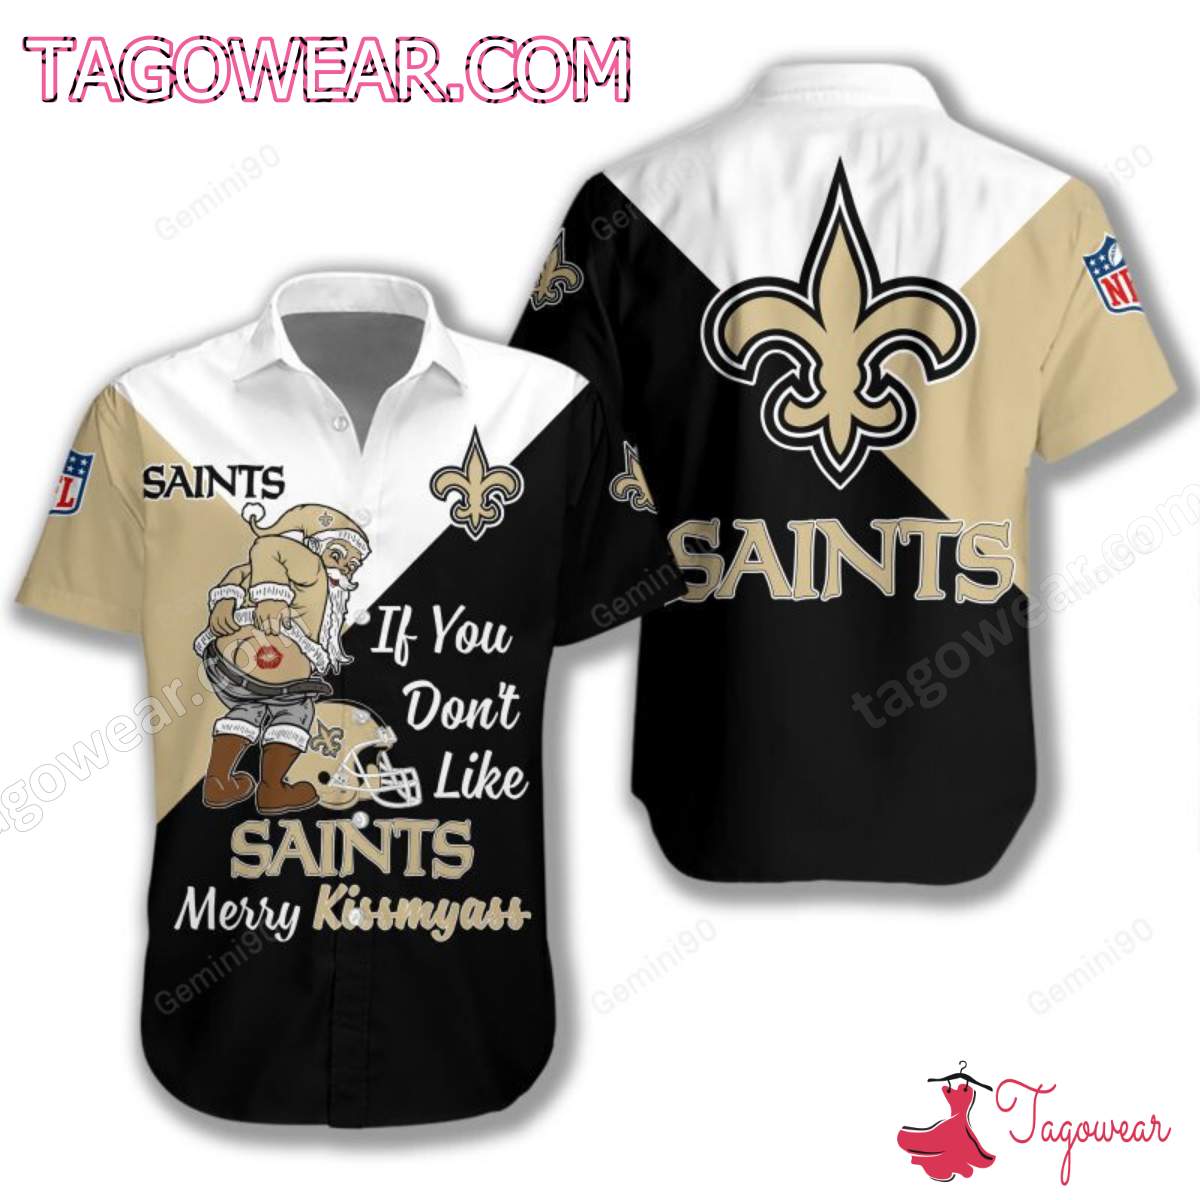 If You Don't Like New Orleans Saints Merry Kissmyass T-shirt, Polo, Hoodie a